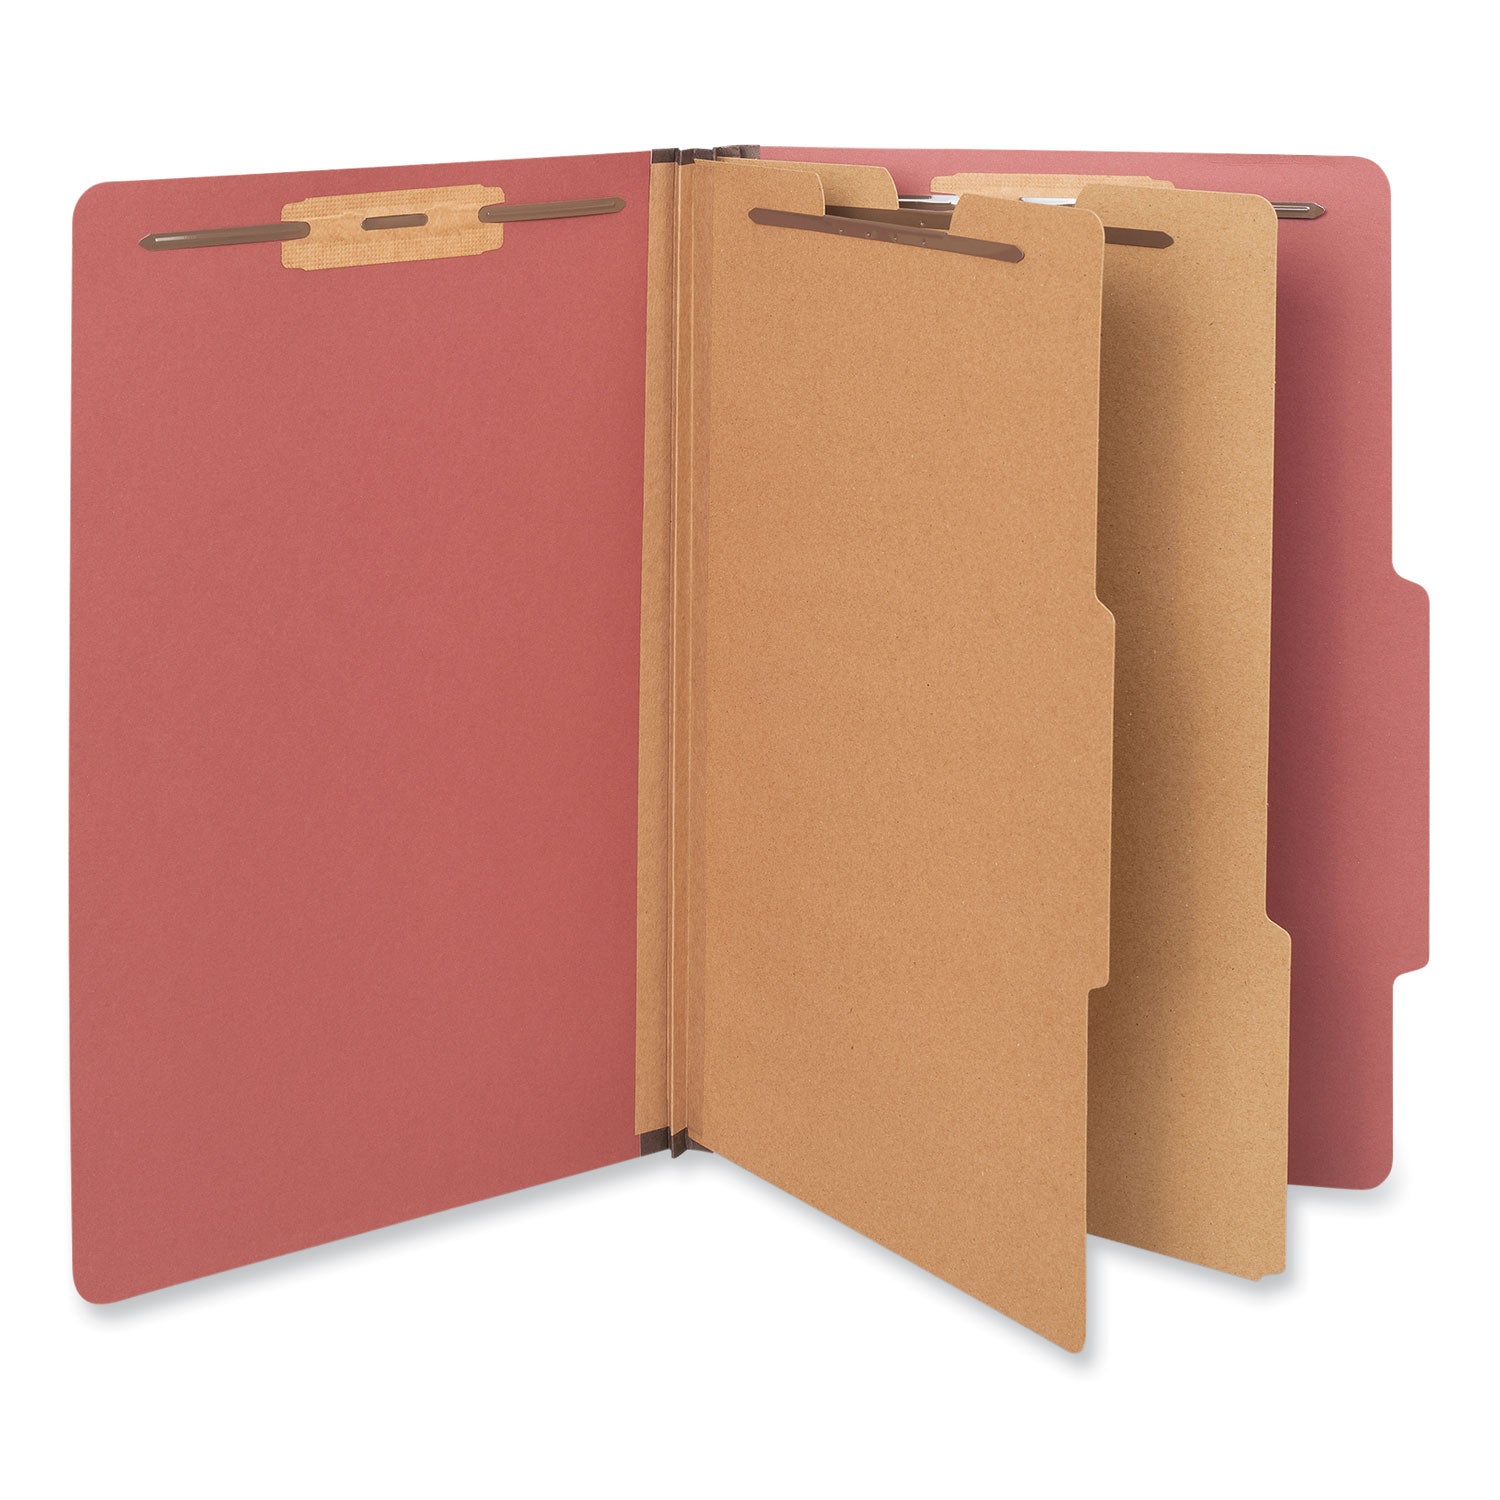 Six-Section Pressboard Classification Folders, 2" Expansion, 2 Dividers, 6 Fasteners, Legal Size, Red Exterior, 10/Box - 